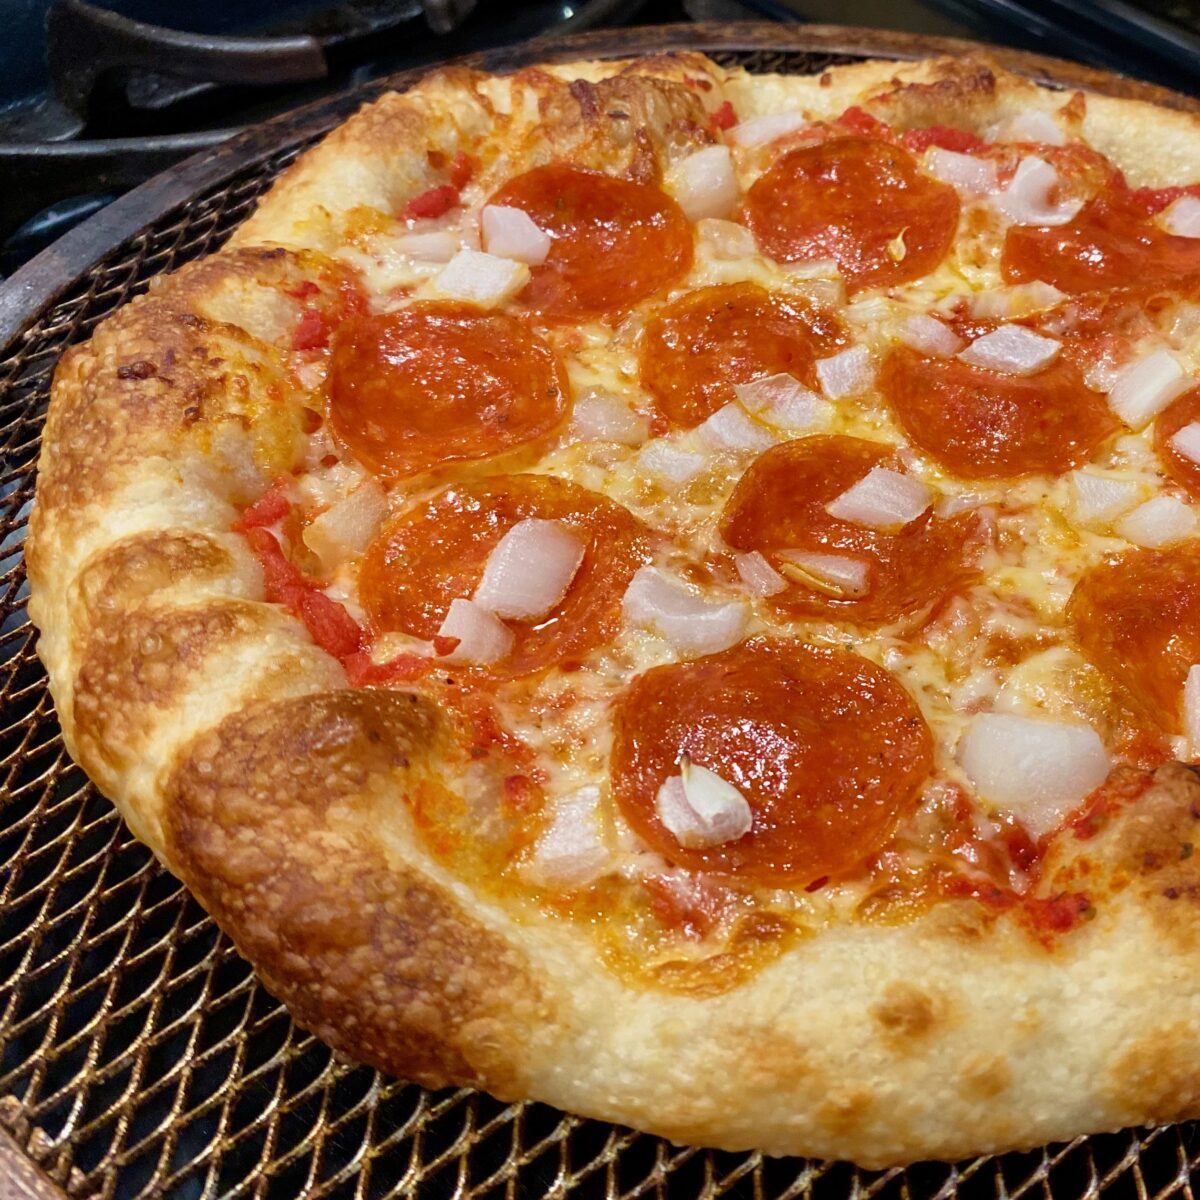 close up view of homemade pizza with bubbly crust using my zesty pizza sauce.